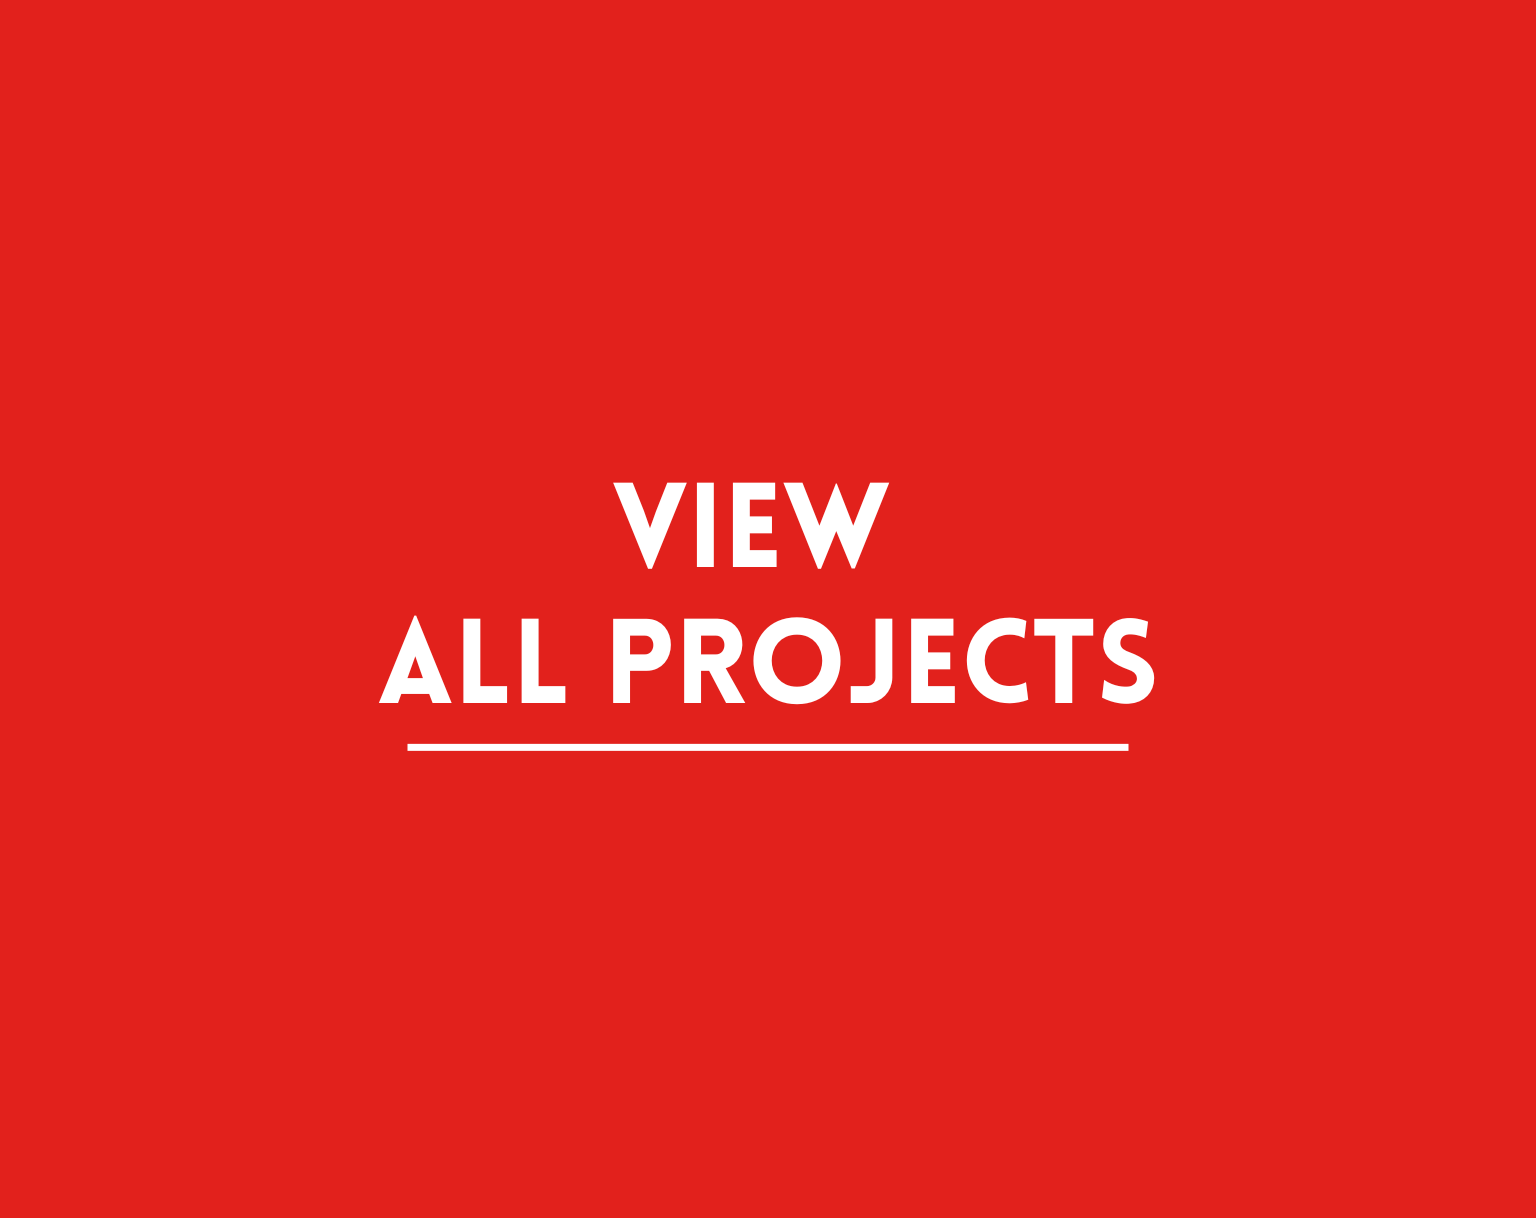 View All Projects